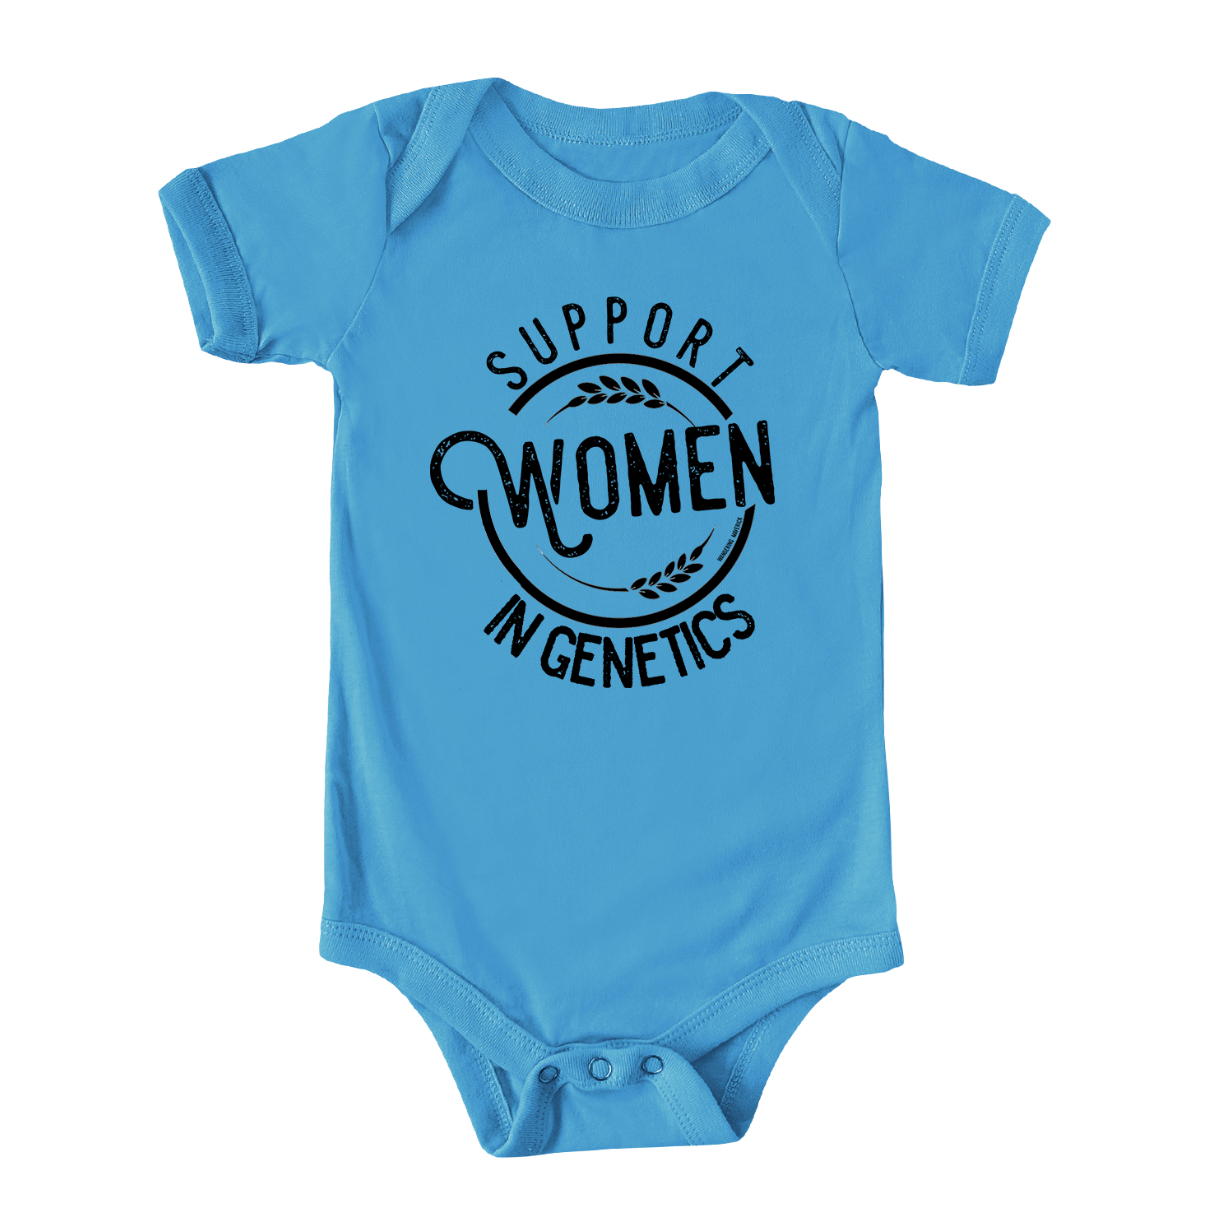 Support Women In Genetics One Piece/T-Shirt (Newborn - Youth XL) - Multiple Colors!